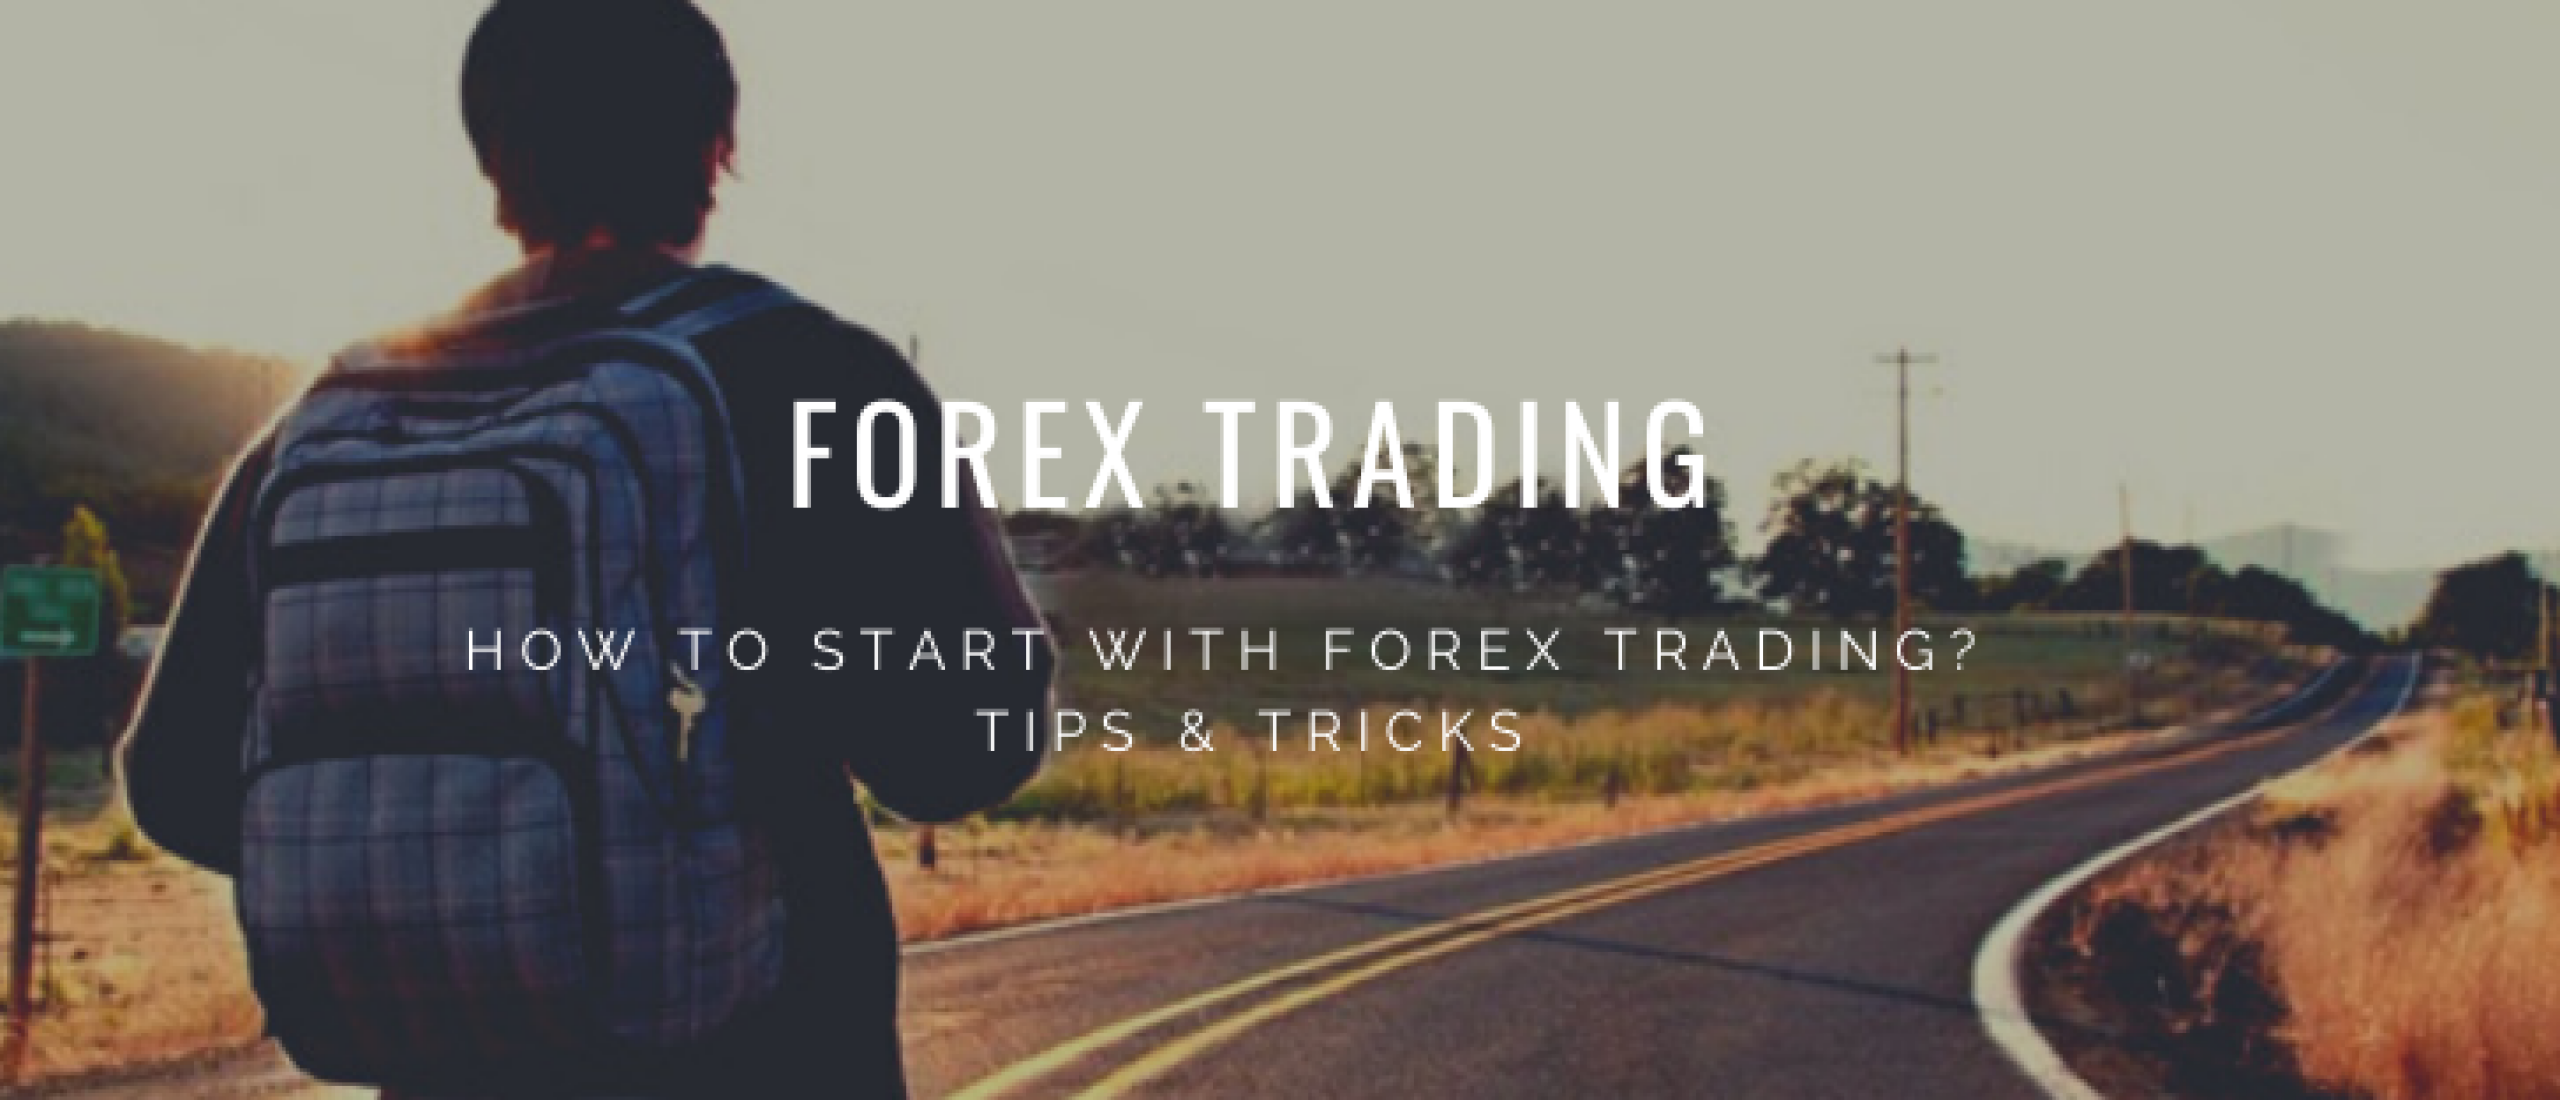 How To Start Forex Trading: 7 Tips to Begin